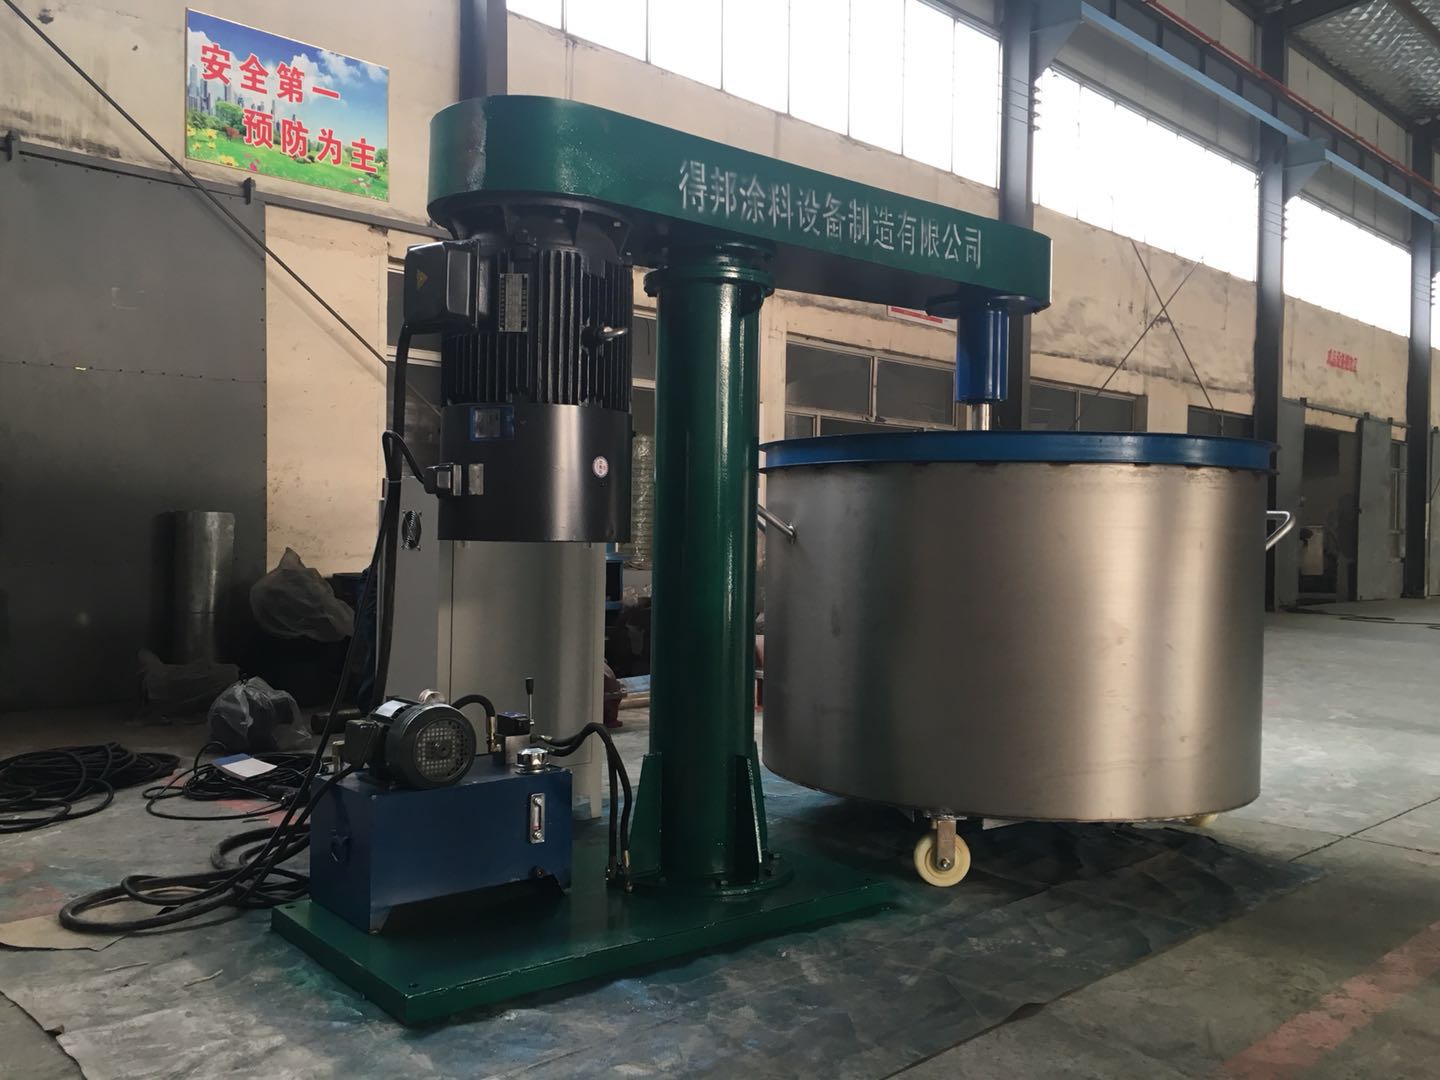 Hydraulic lifting high-speed frequency conversion disperser